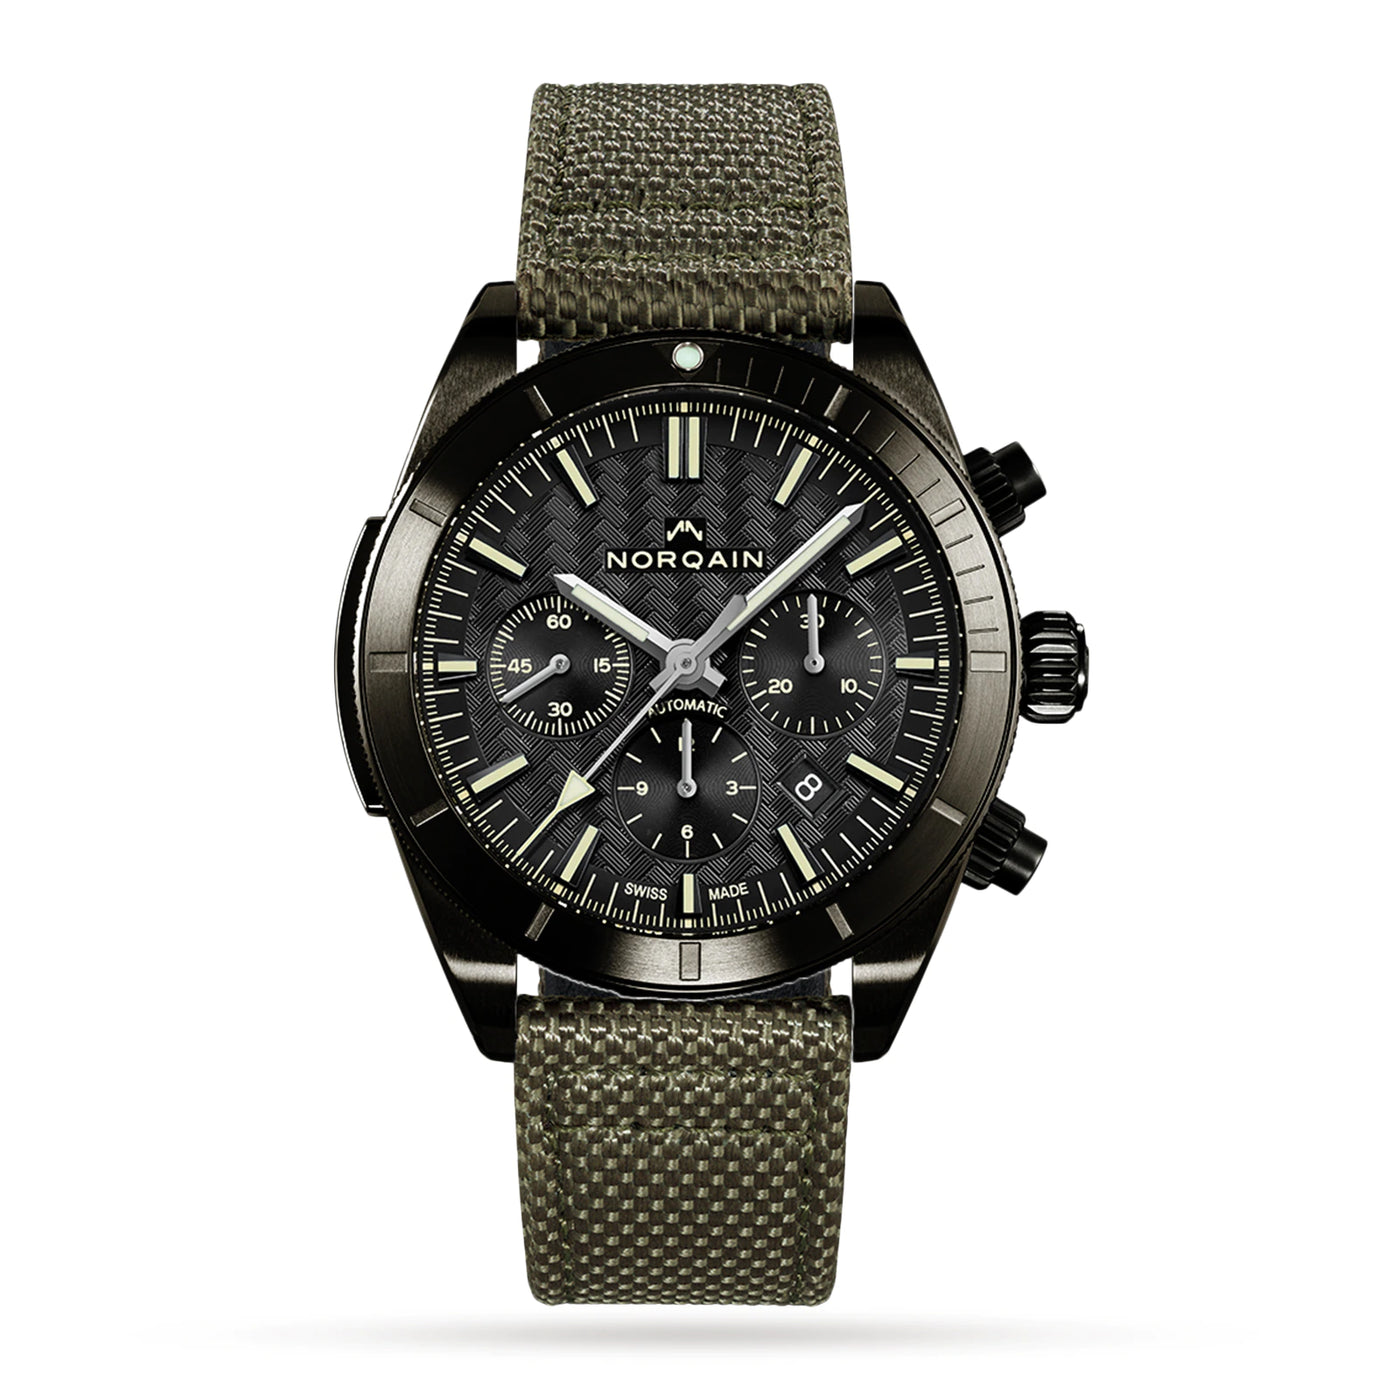 Adventure Sport Chrono - Gharyal by Collectibles 